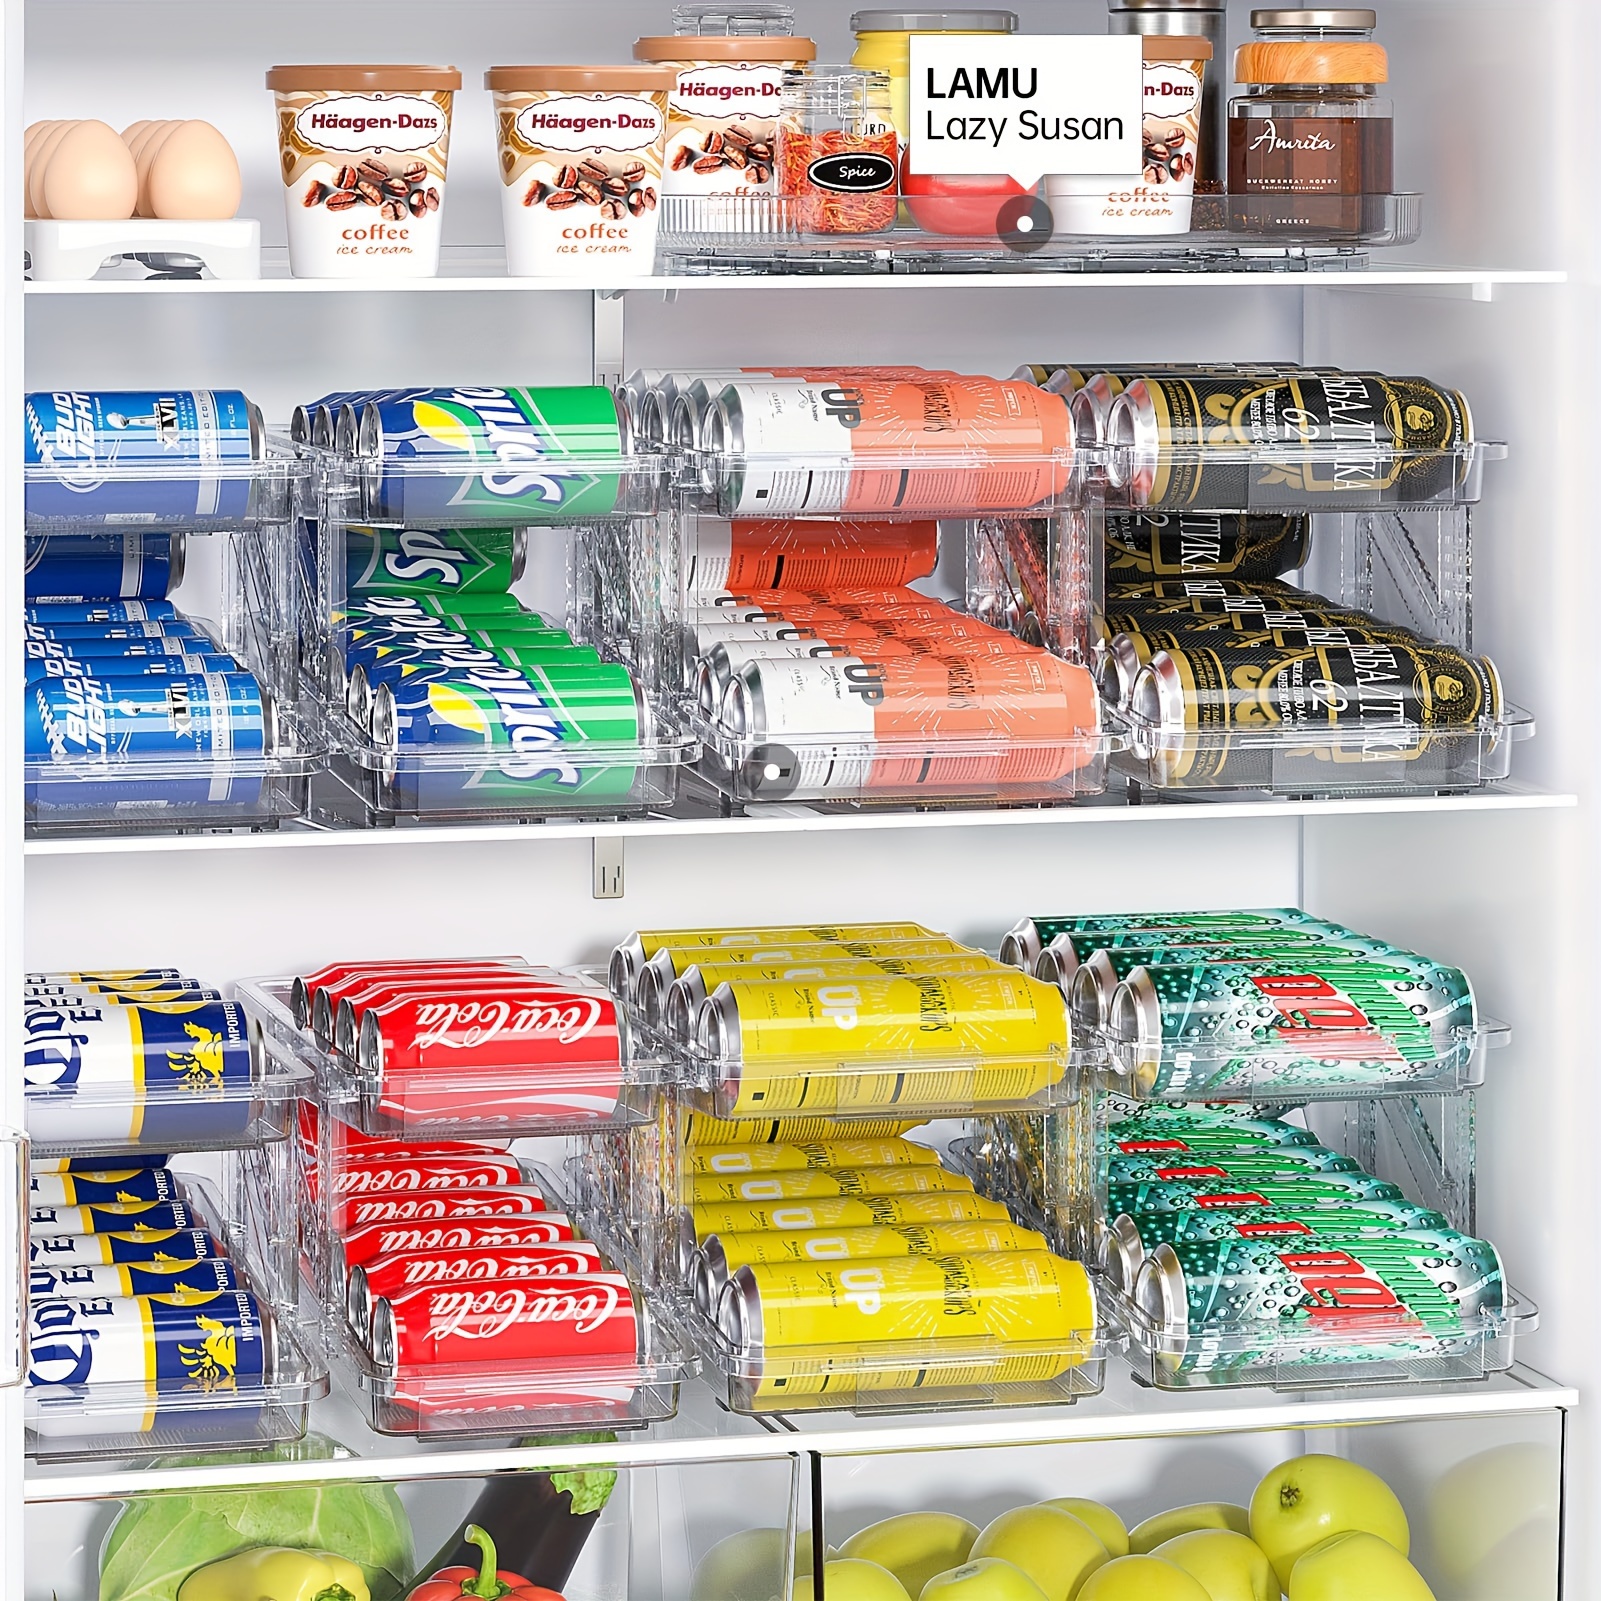 2pcs Kitchen Can Dispenser Rack - Refrigerator Soda Can Organizer - Pantry  Can Storage Holder, Great For Fridge And Freezer Organization - Holds Food  And Soup Cans (transparent)